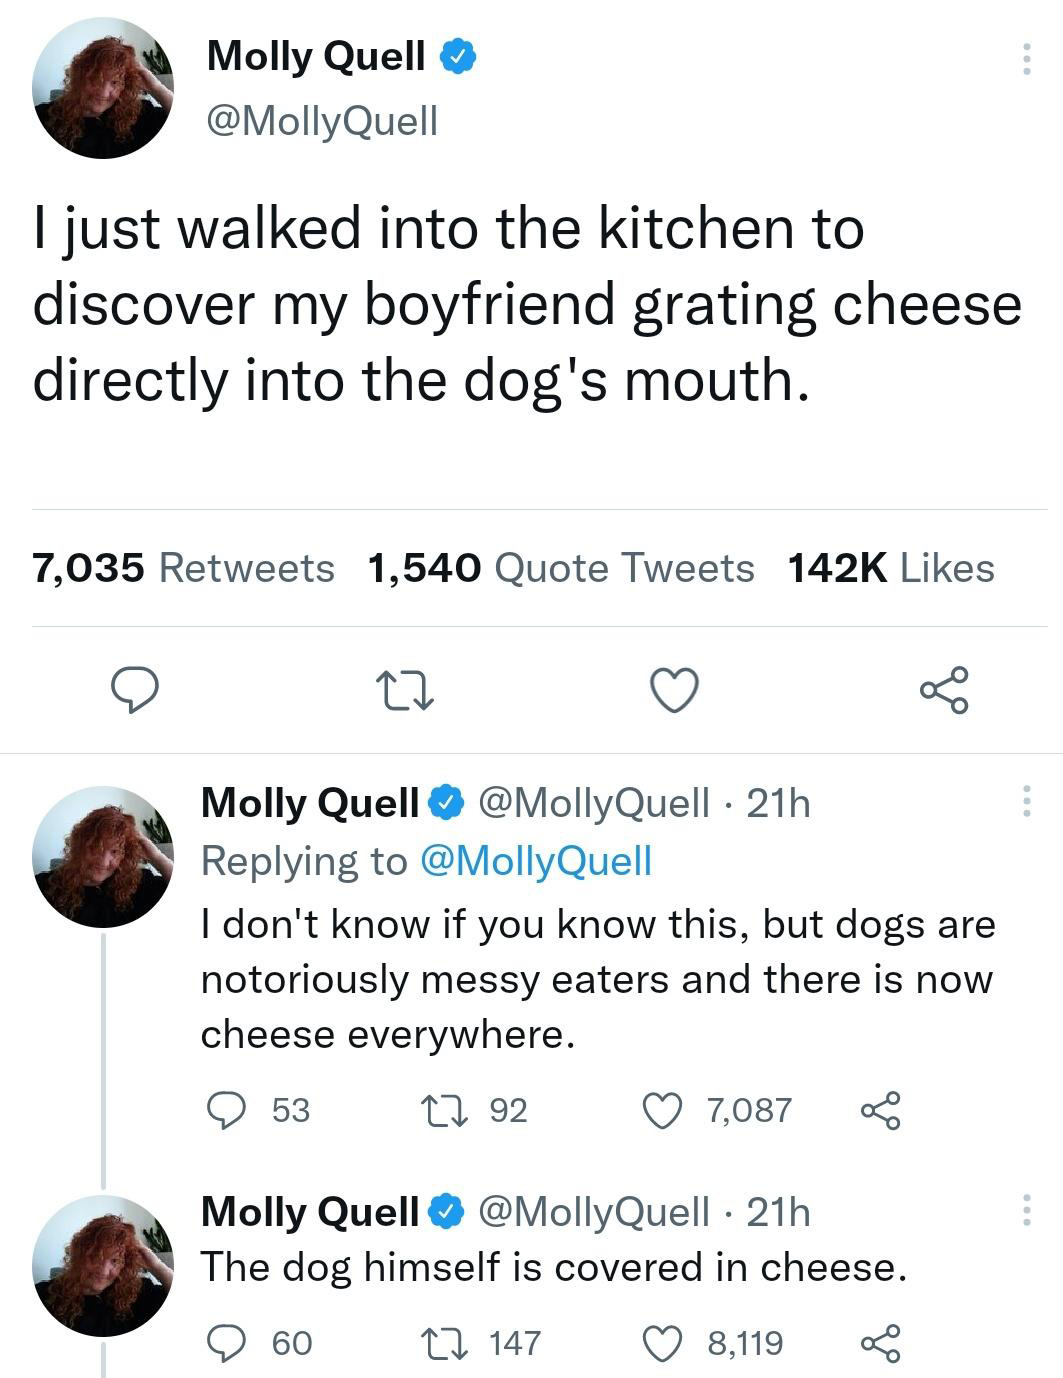 Molly Quell I just walked into the kitchen to discover my boyfriend grating cheese directly into the dog's mouth. 7,035 1,540 Quote Tweets 27 Molly Quell Quell 21h Quell I don't know if you know this, but dogs are notoriously messy eaters and there is now